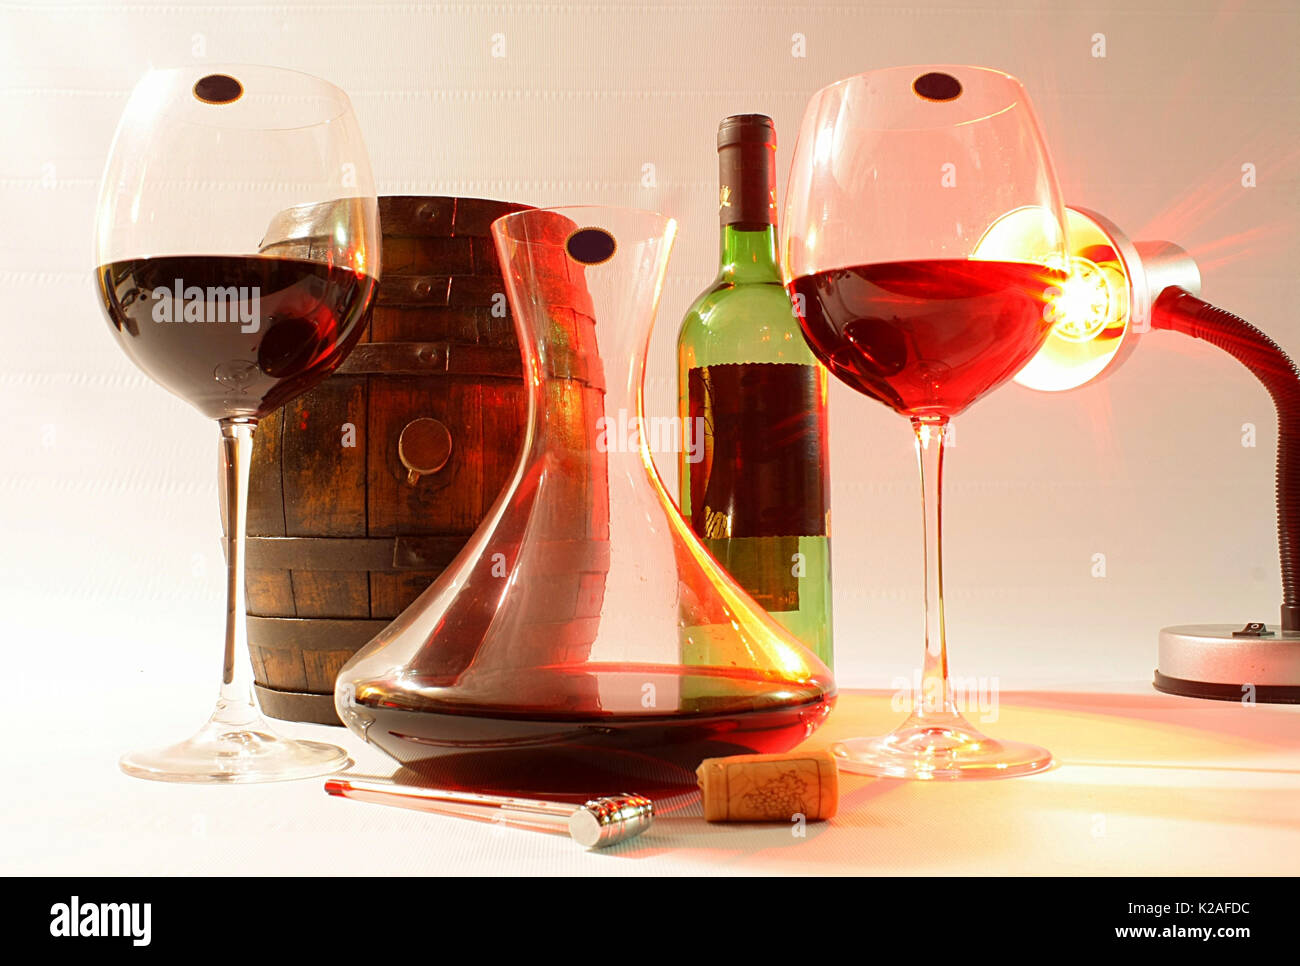 Glasses, decanter, bottle and barrel, lit by a lamp Stock Photo